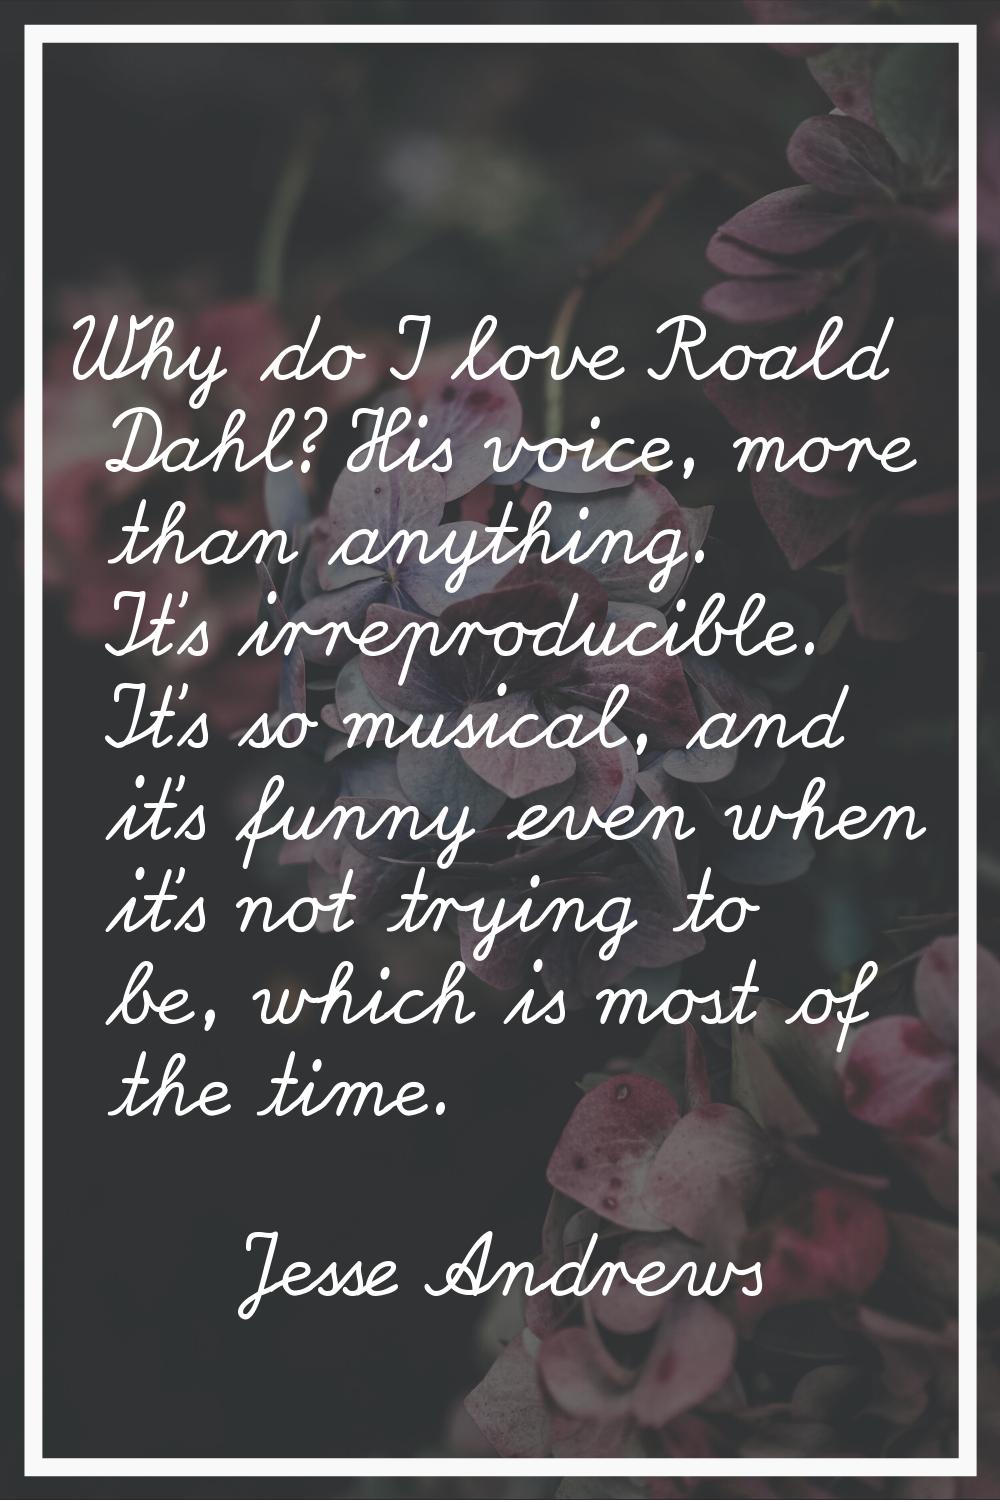 Why do I love Roald Dahl? His voice, more than anything. It's irreproducible. It's so musical, and 